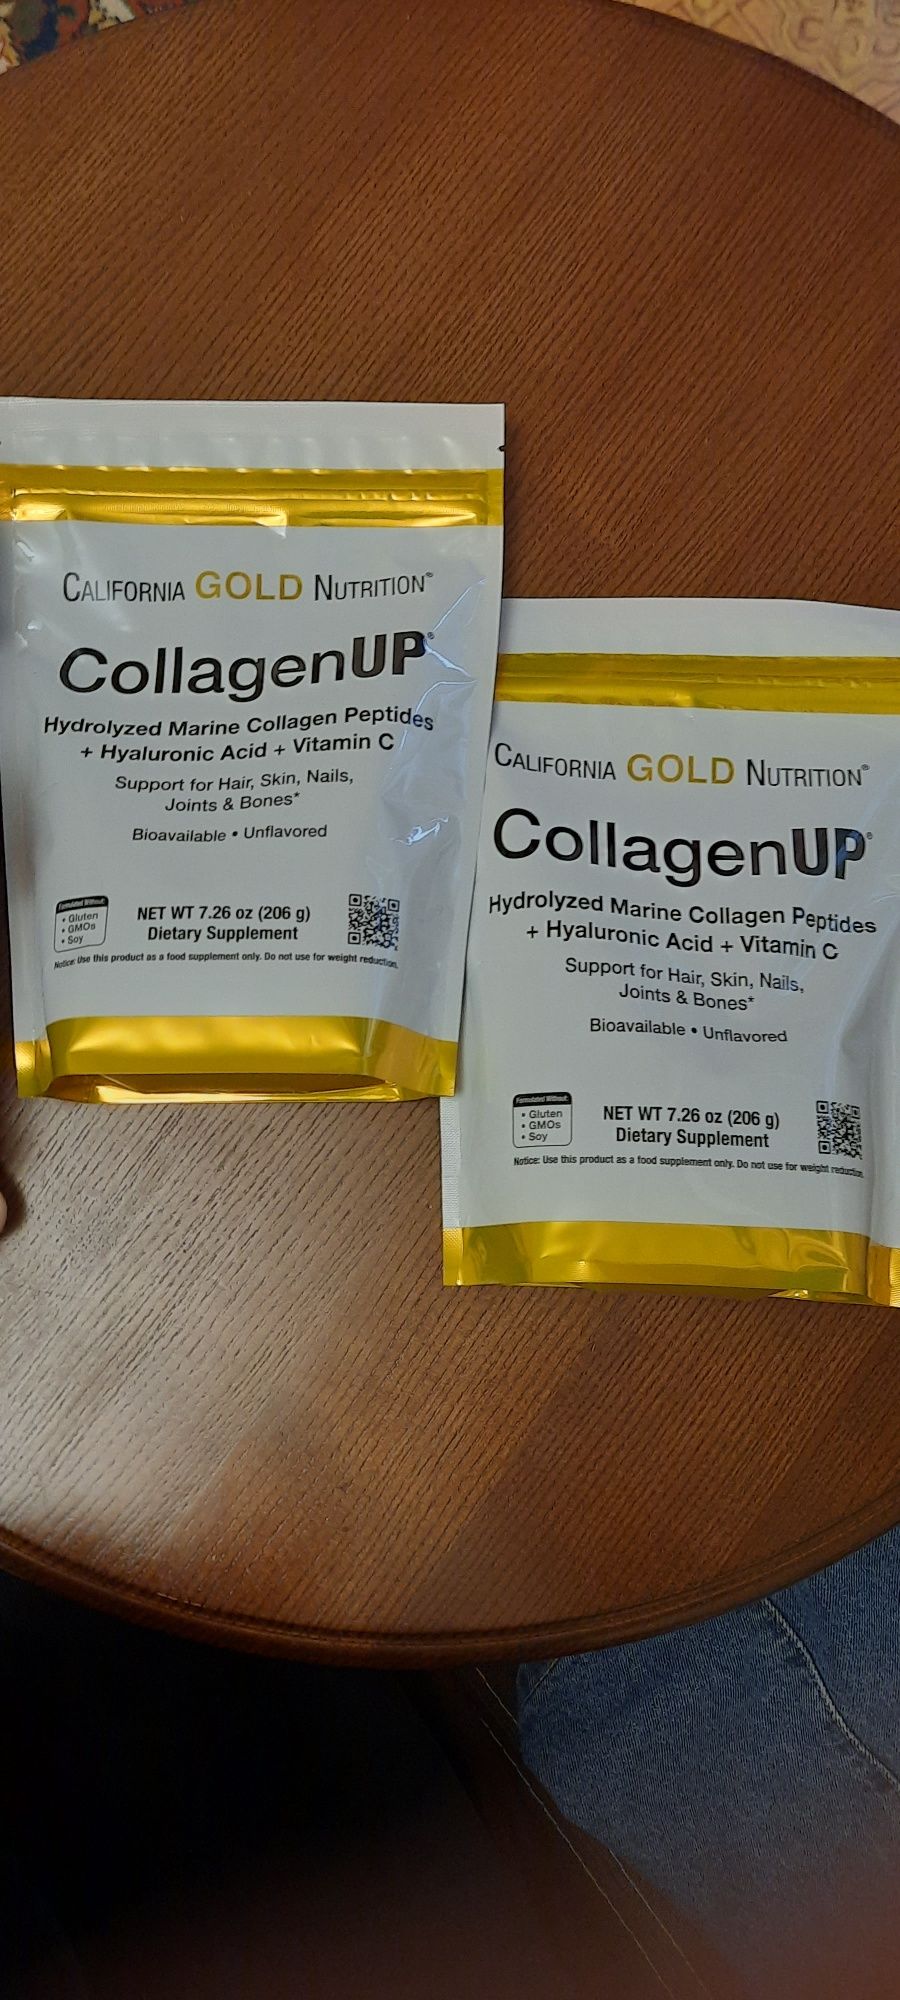 CollagenUP Колаген California Gold Nutrition iherb